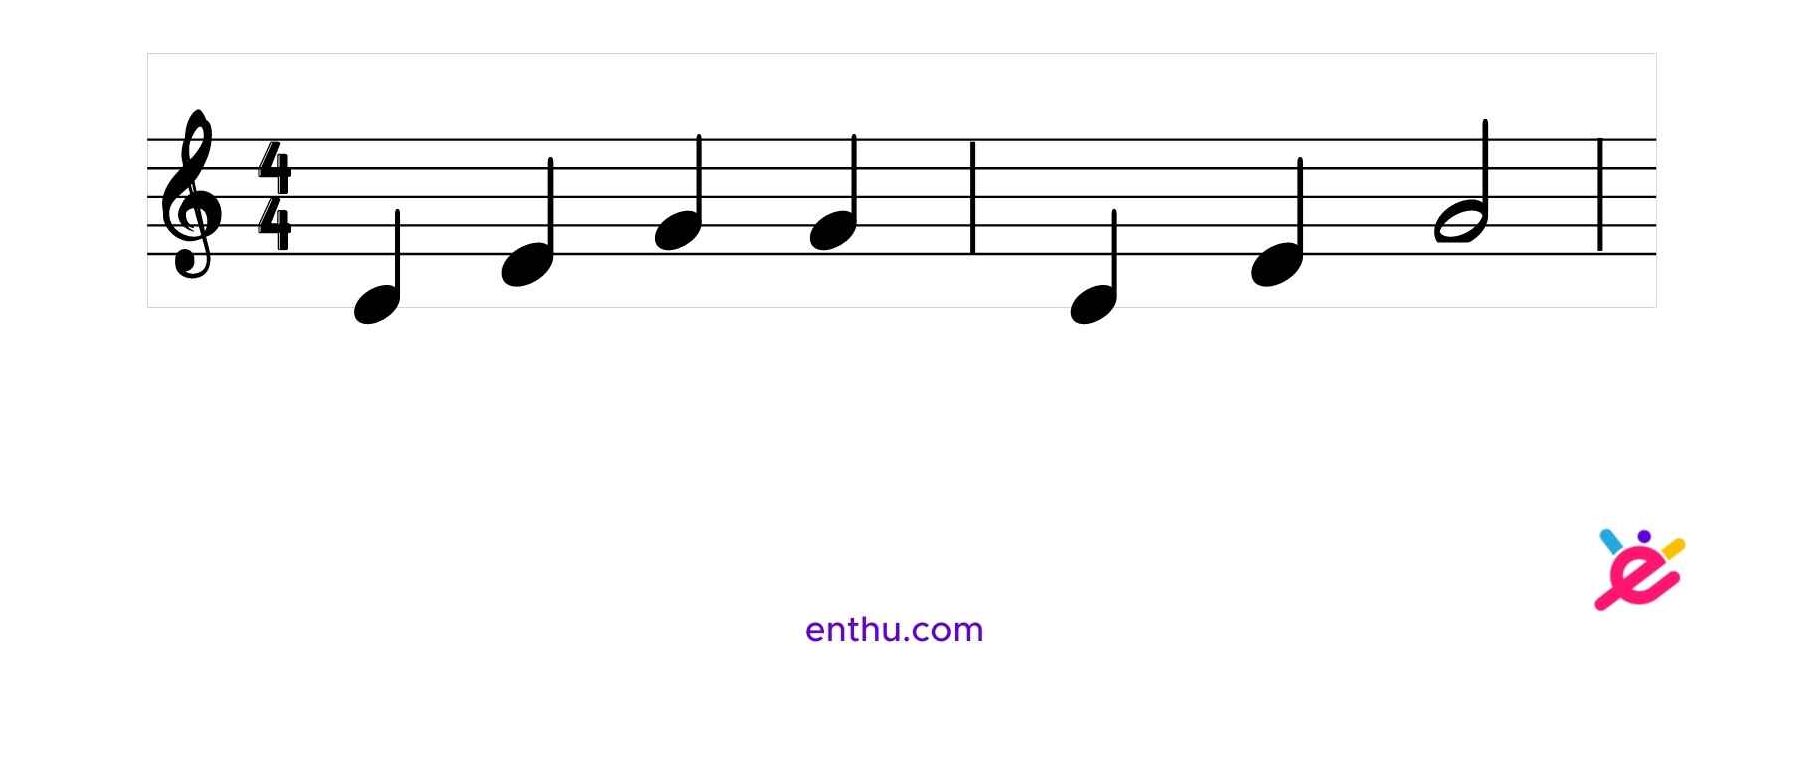 cut time in music - 4/4 time signature